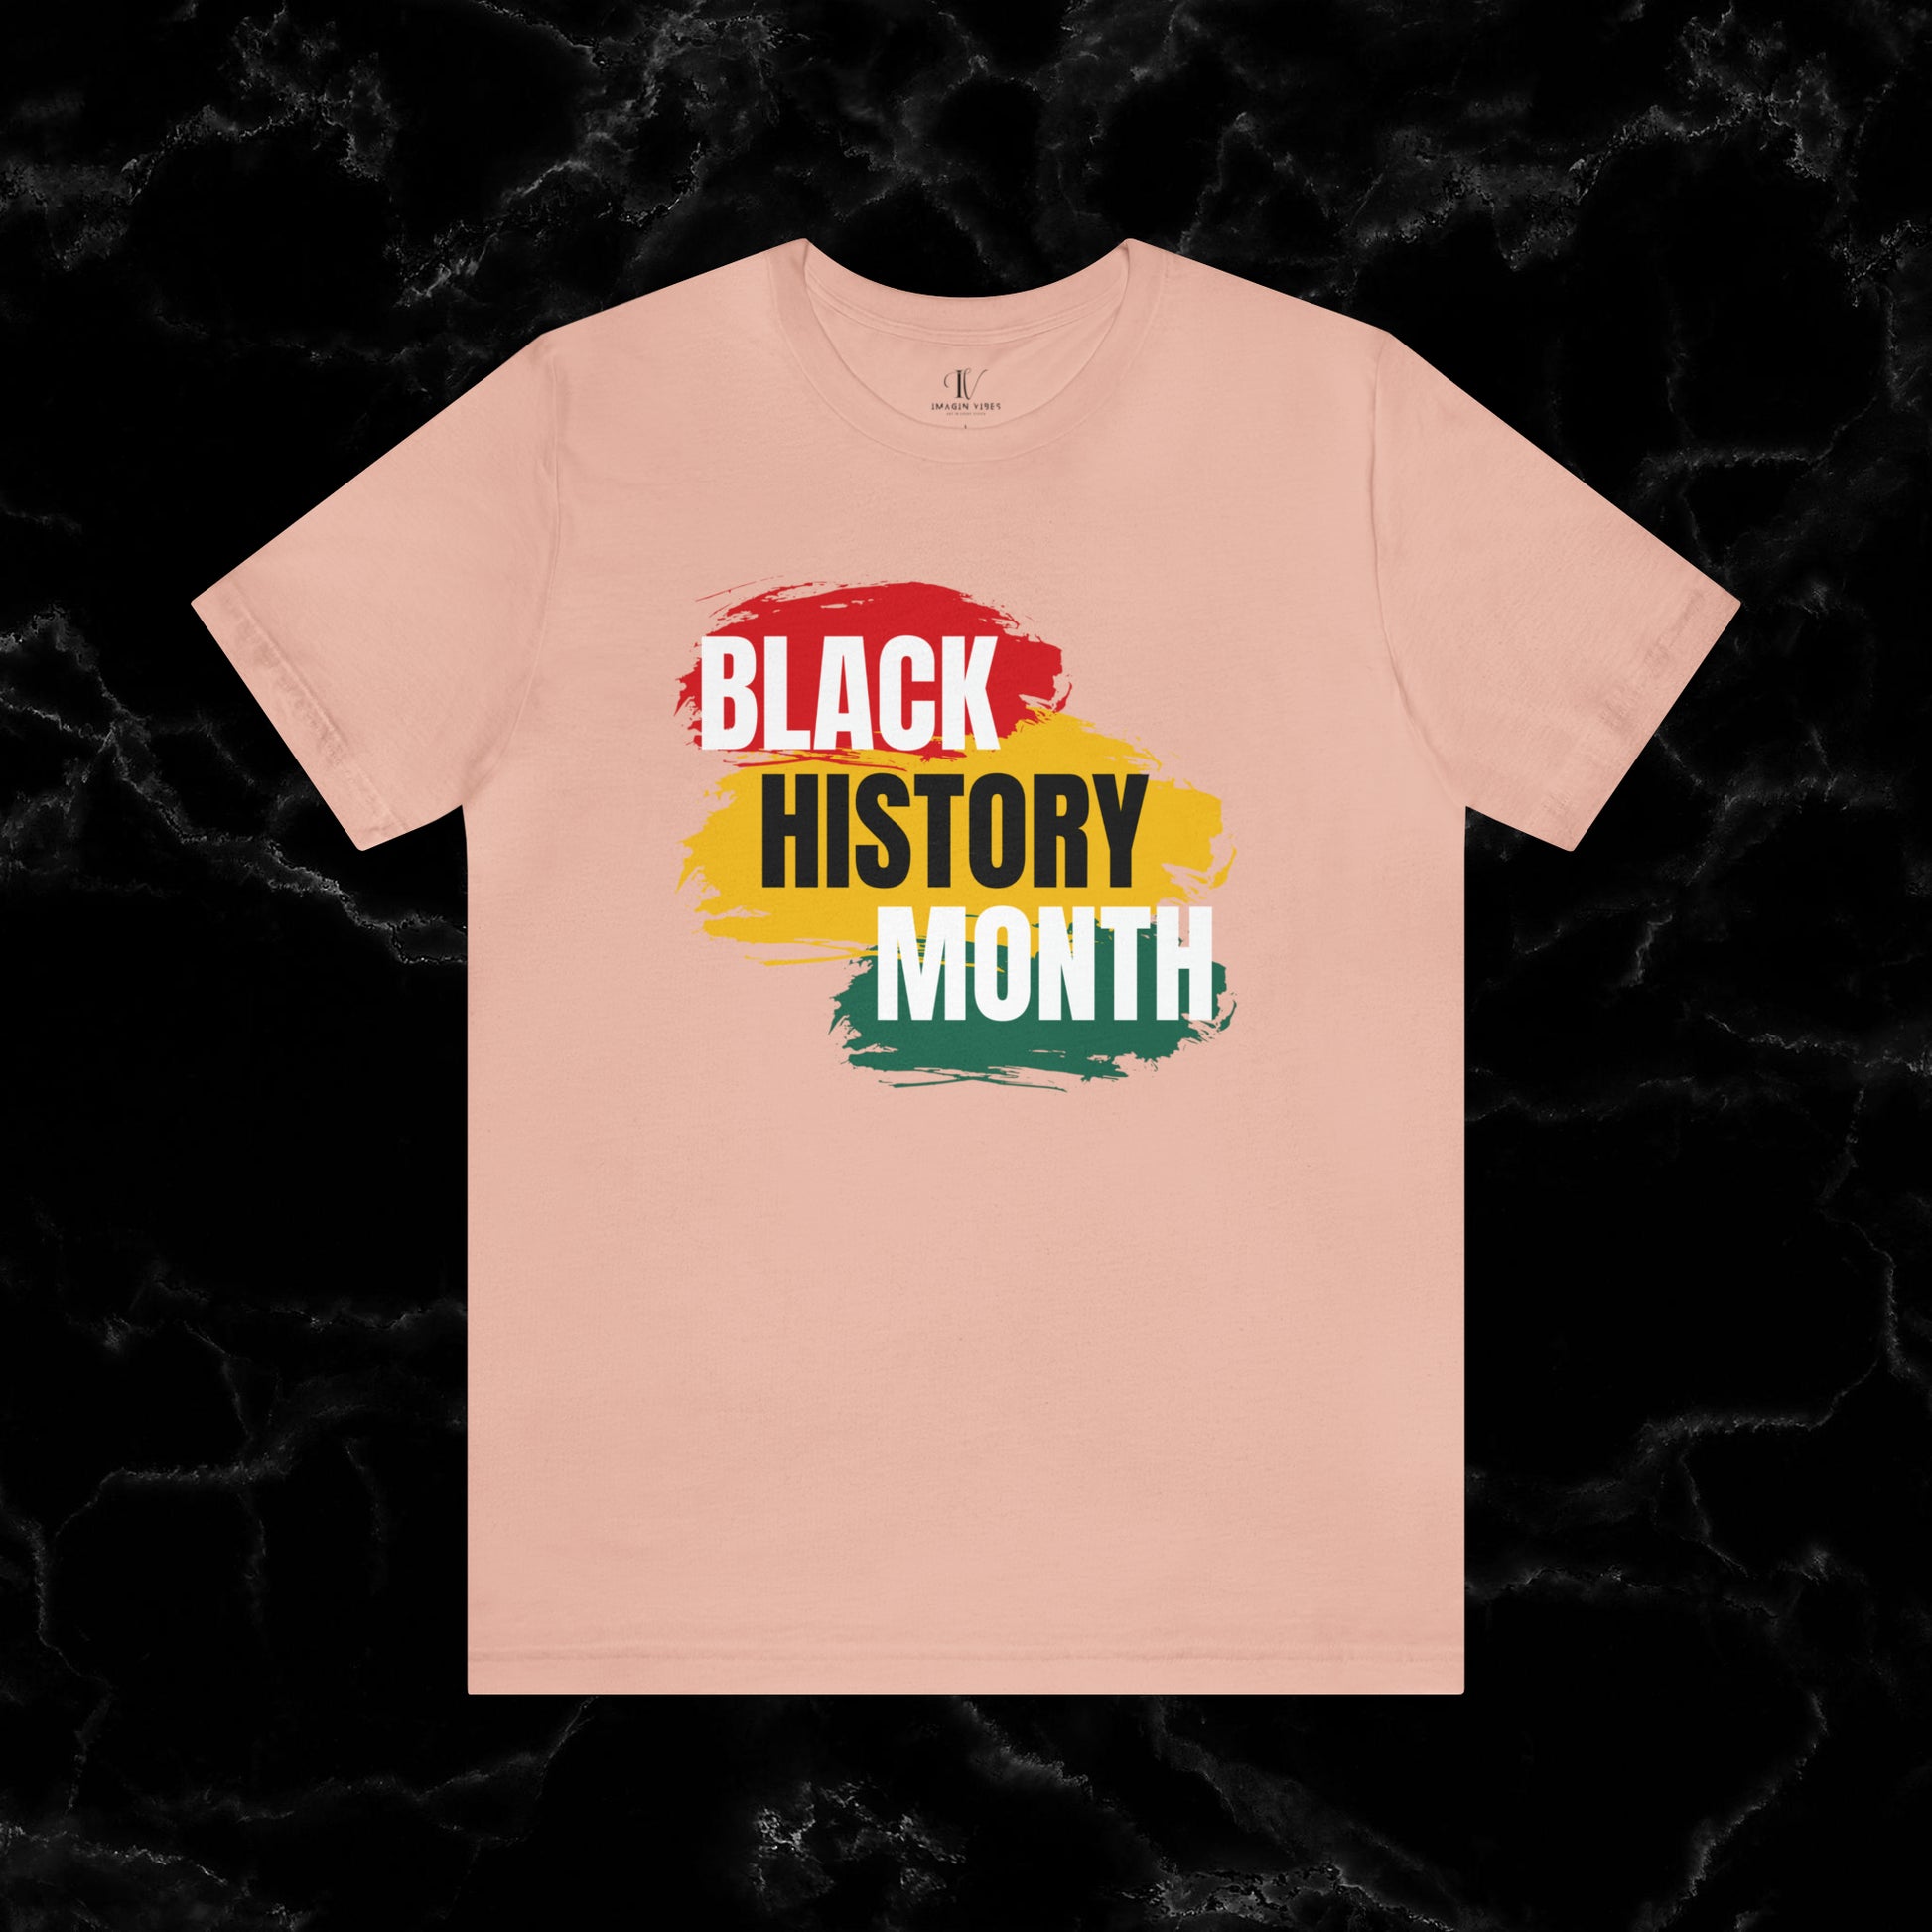 Trendy Black History Month Shirts Celebrating African American Pride and Heritage T-Shirt Peach XS 